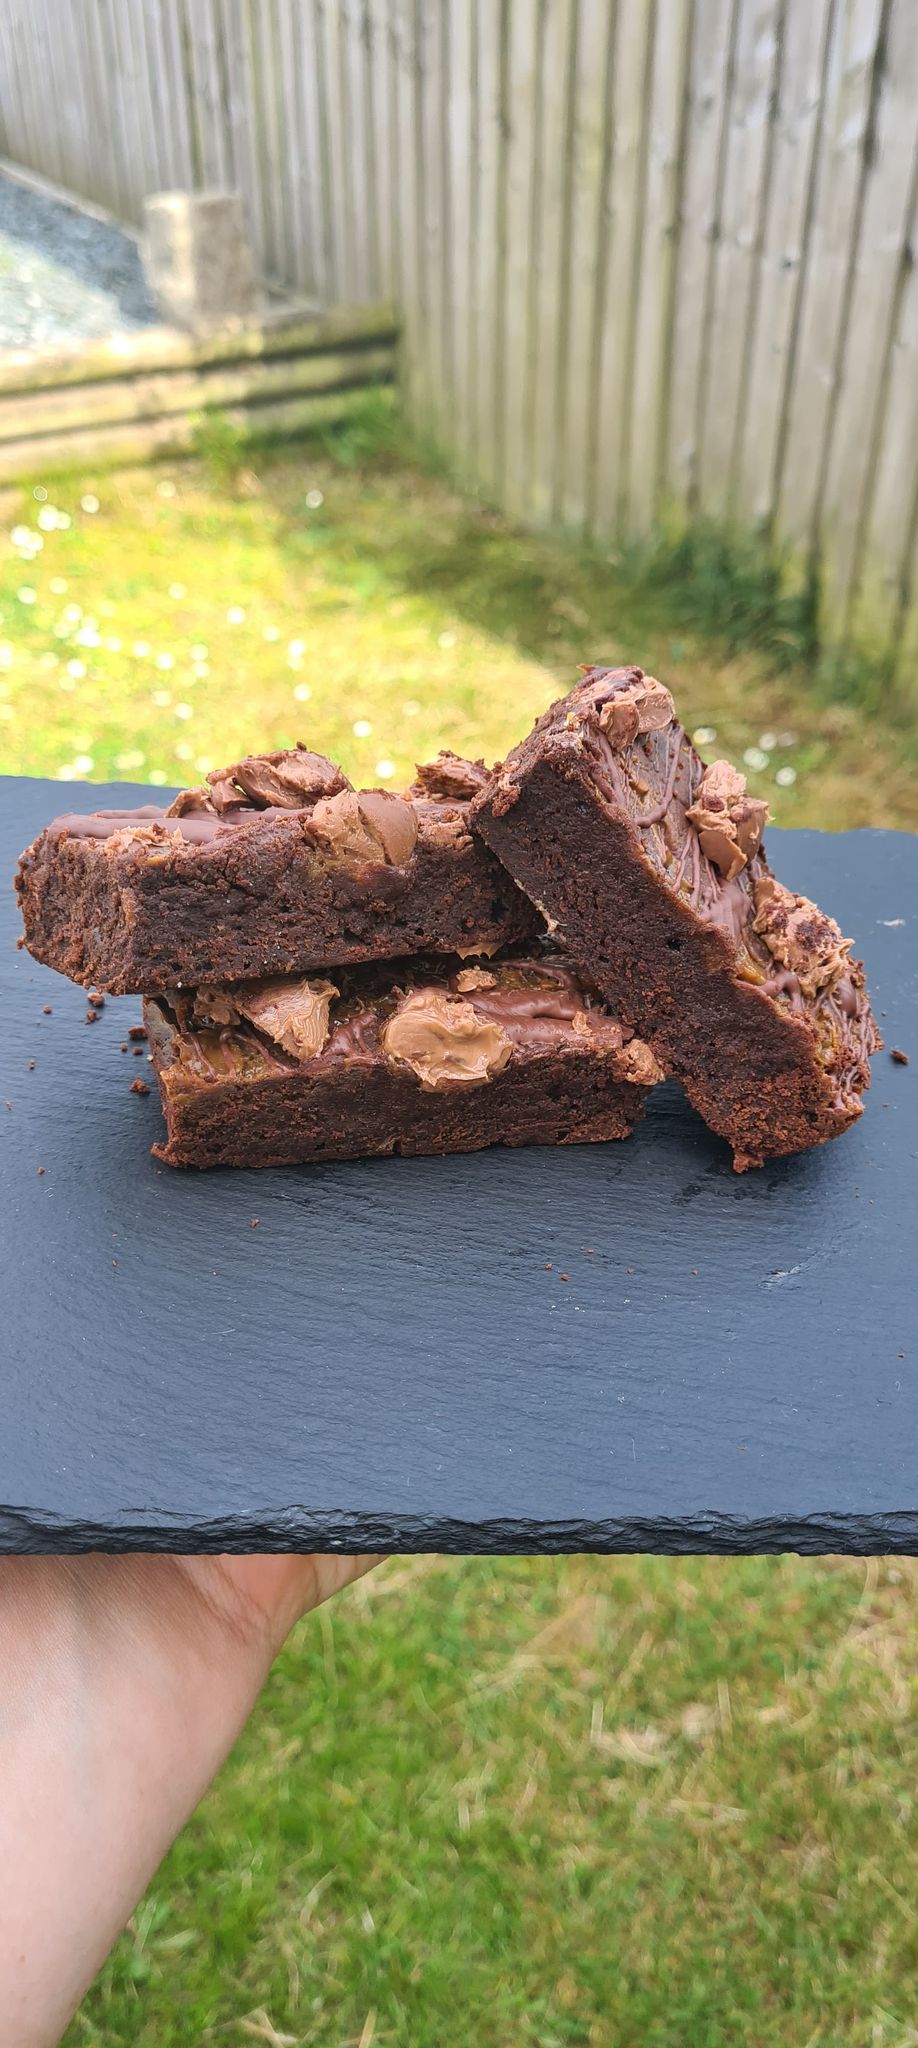 A classic, malteaser brownie! Topped with crushed malteasers. The best of both worlds!